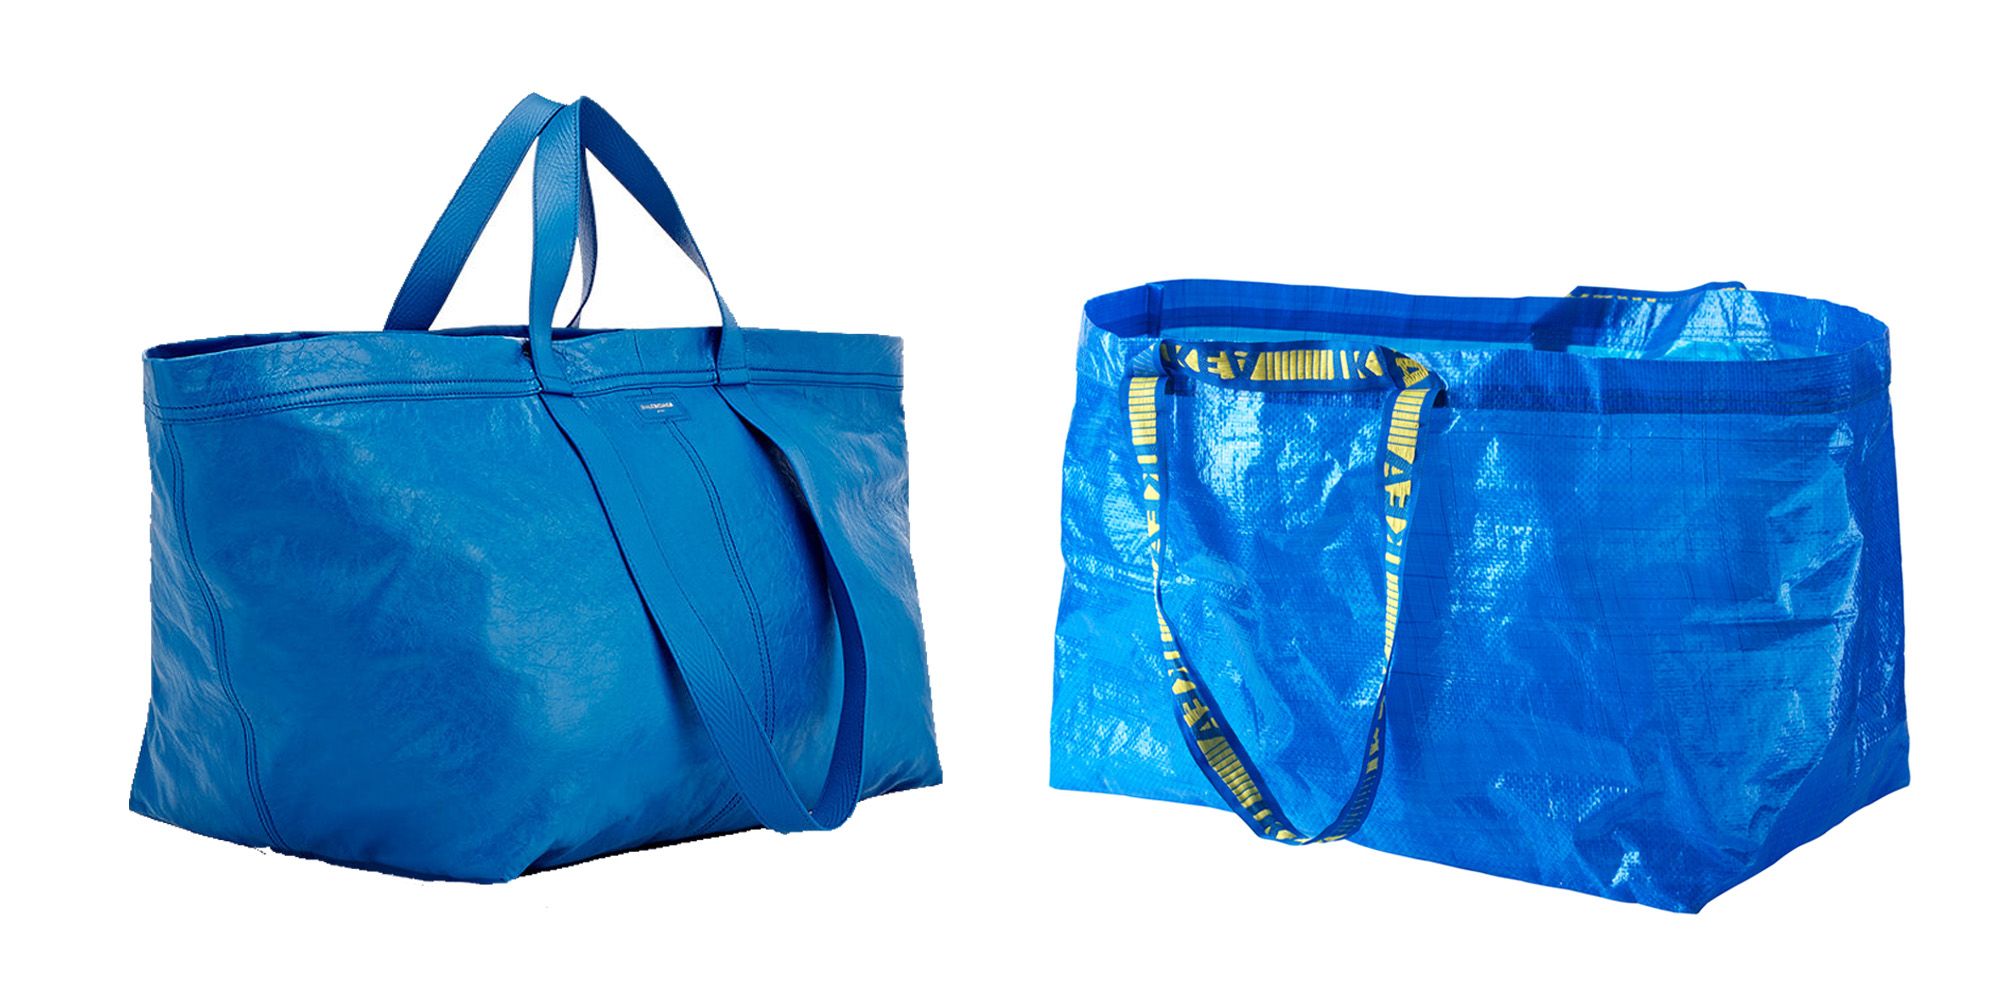 The Next “It” Bags To Add To Your Spring/Summer Collection – Harbour City